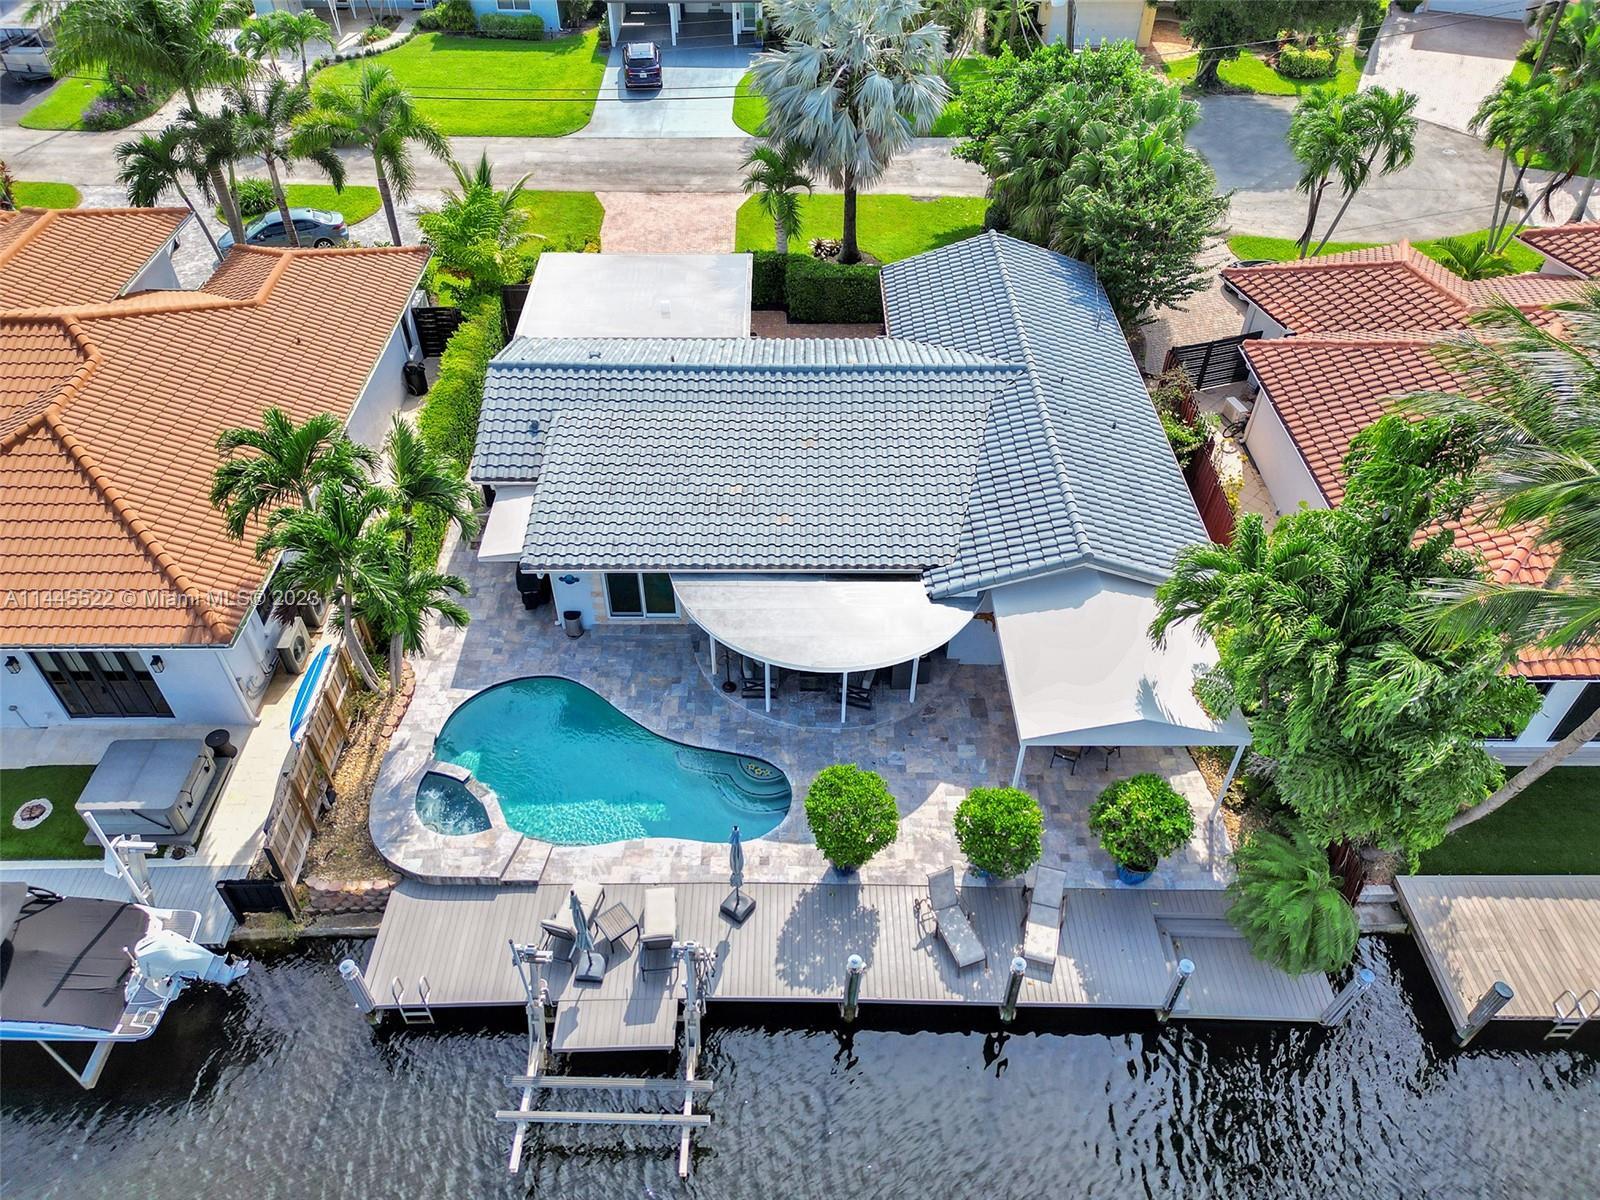 This OCEAN ACCESS waterfront pool home is located at the end of a PRIVATE CUL-DE-SAC in desirable Wi